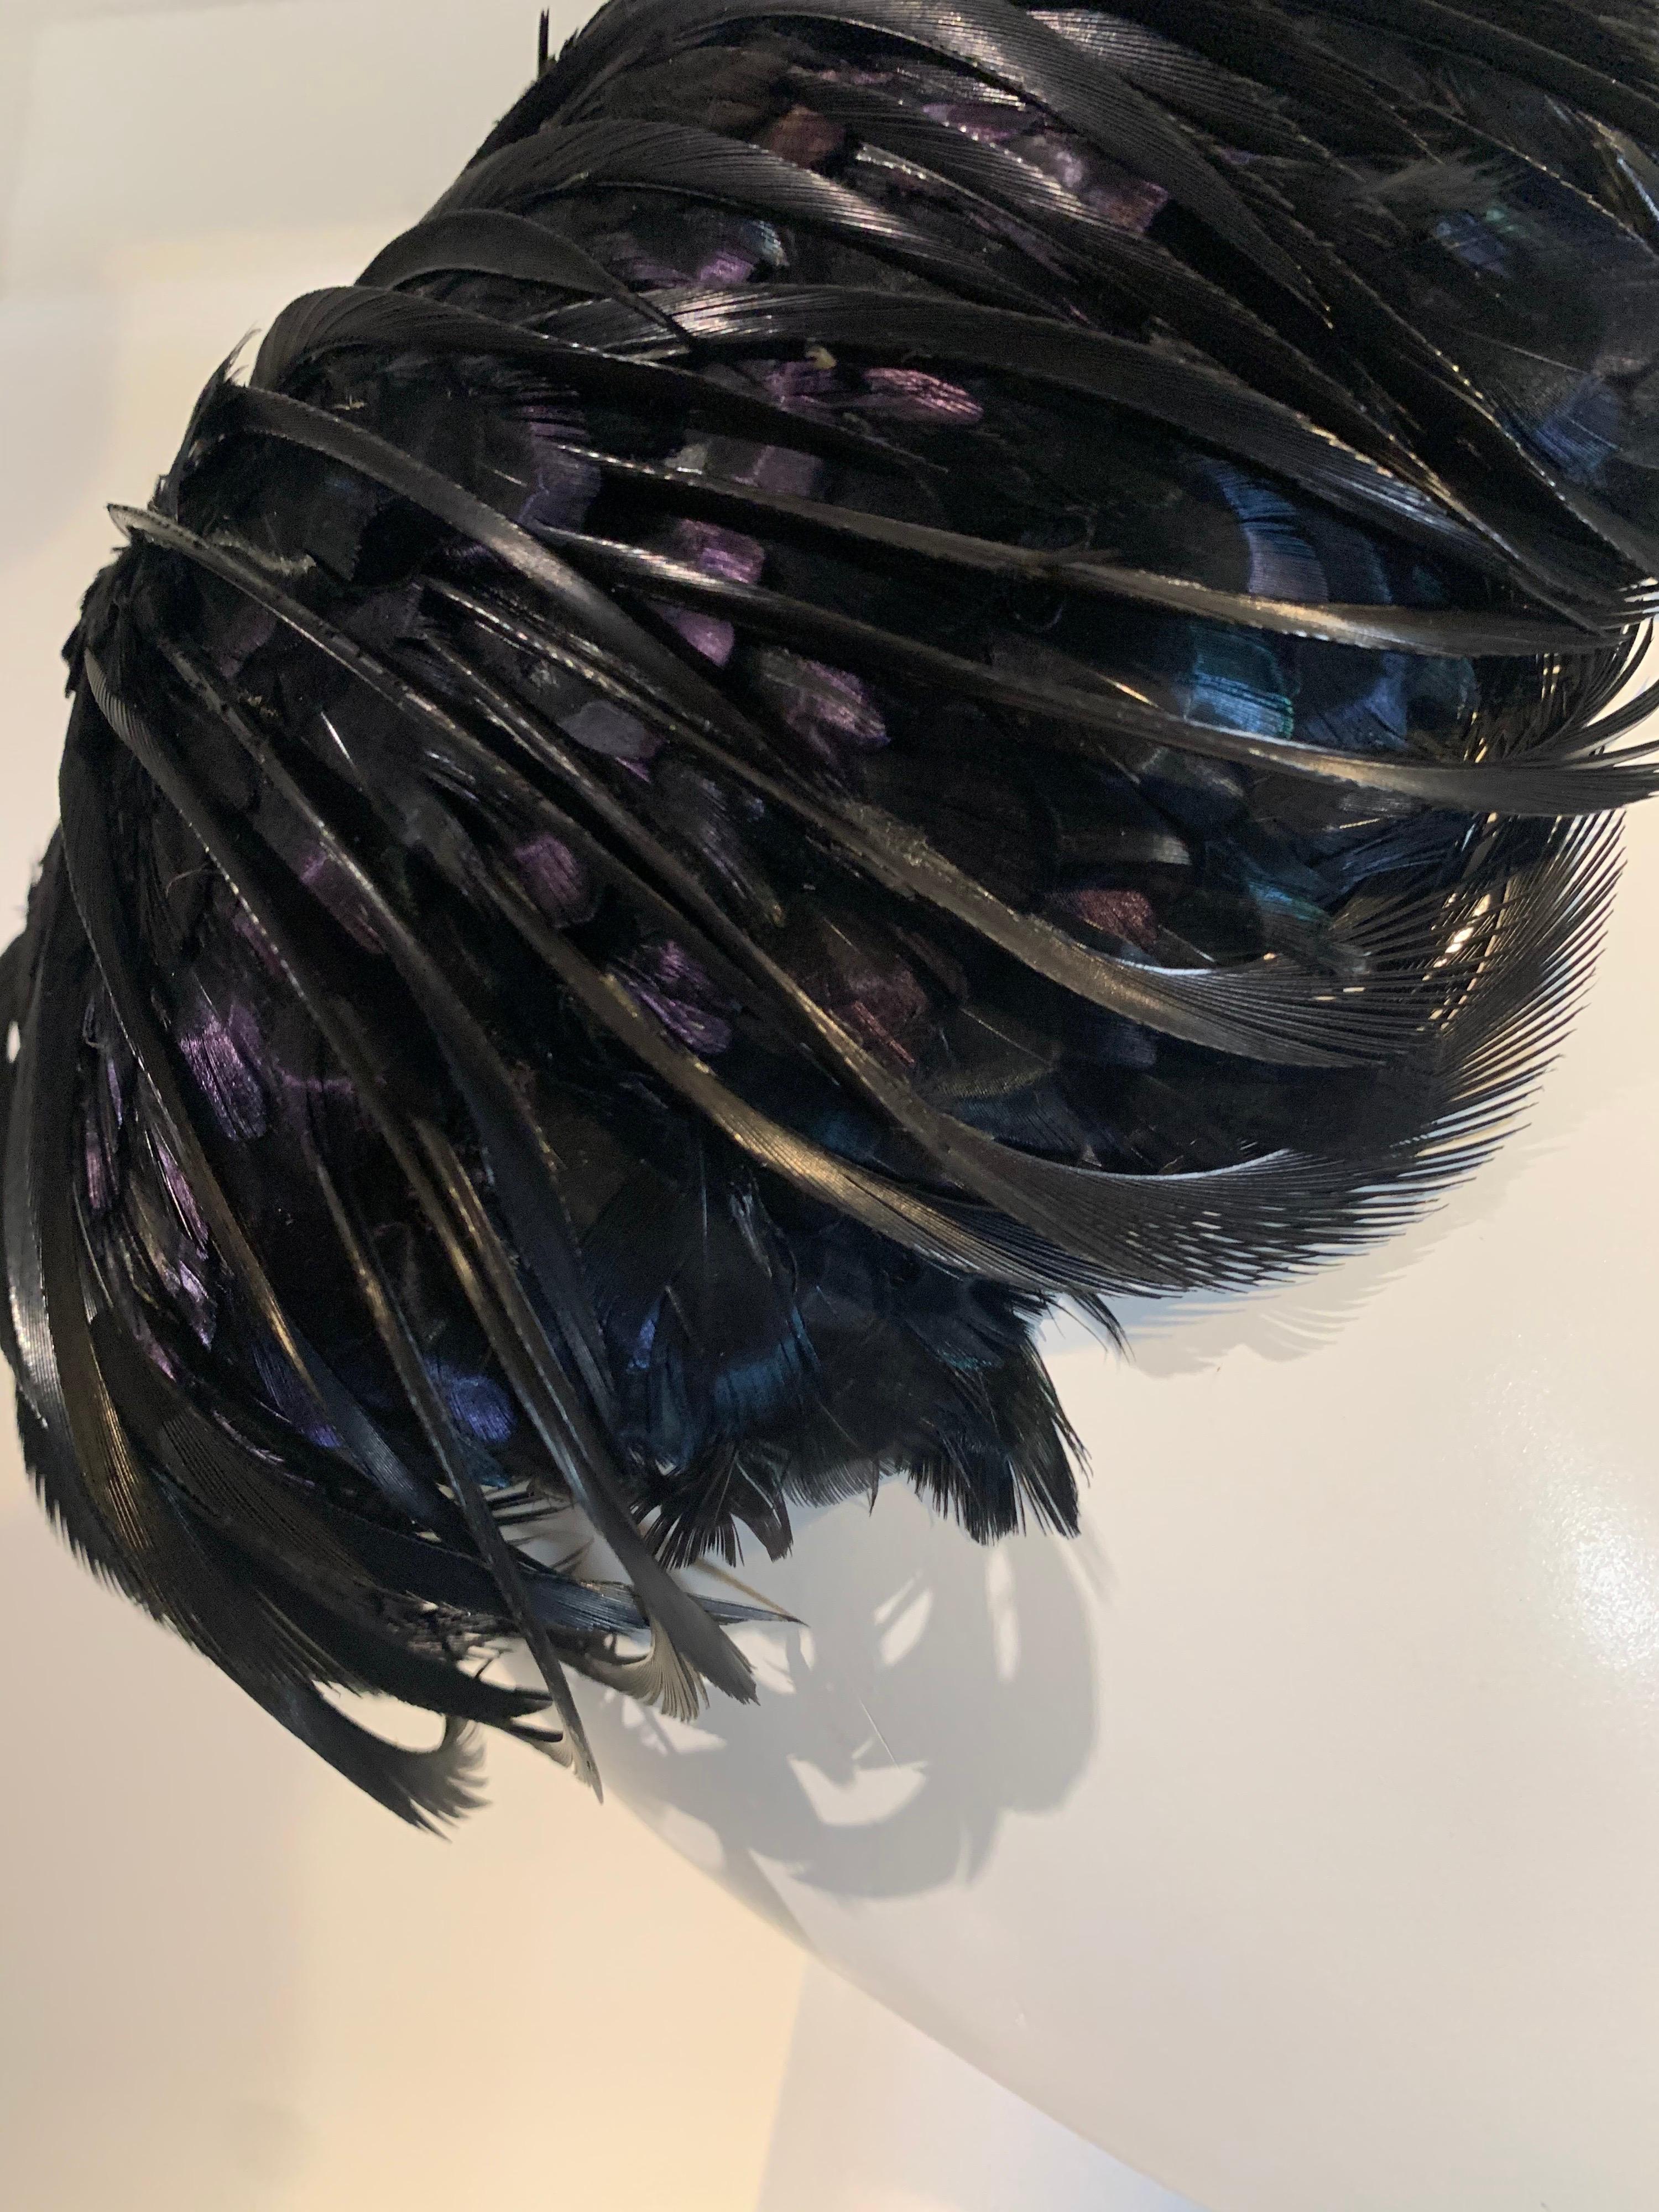 A gorgeous 1960s Christian Dior hat by Marc Bohan: A structured turban-style cocktail hat covered in iridescent blue pheasant feathers is enhanced by crisp black feathers that appear as wisps of hair. One size. 